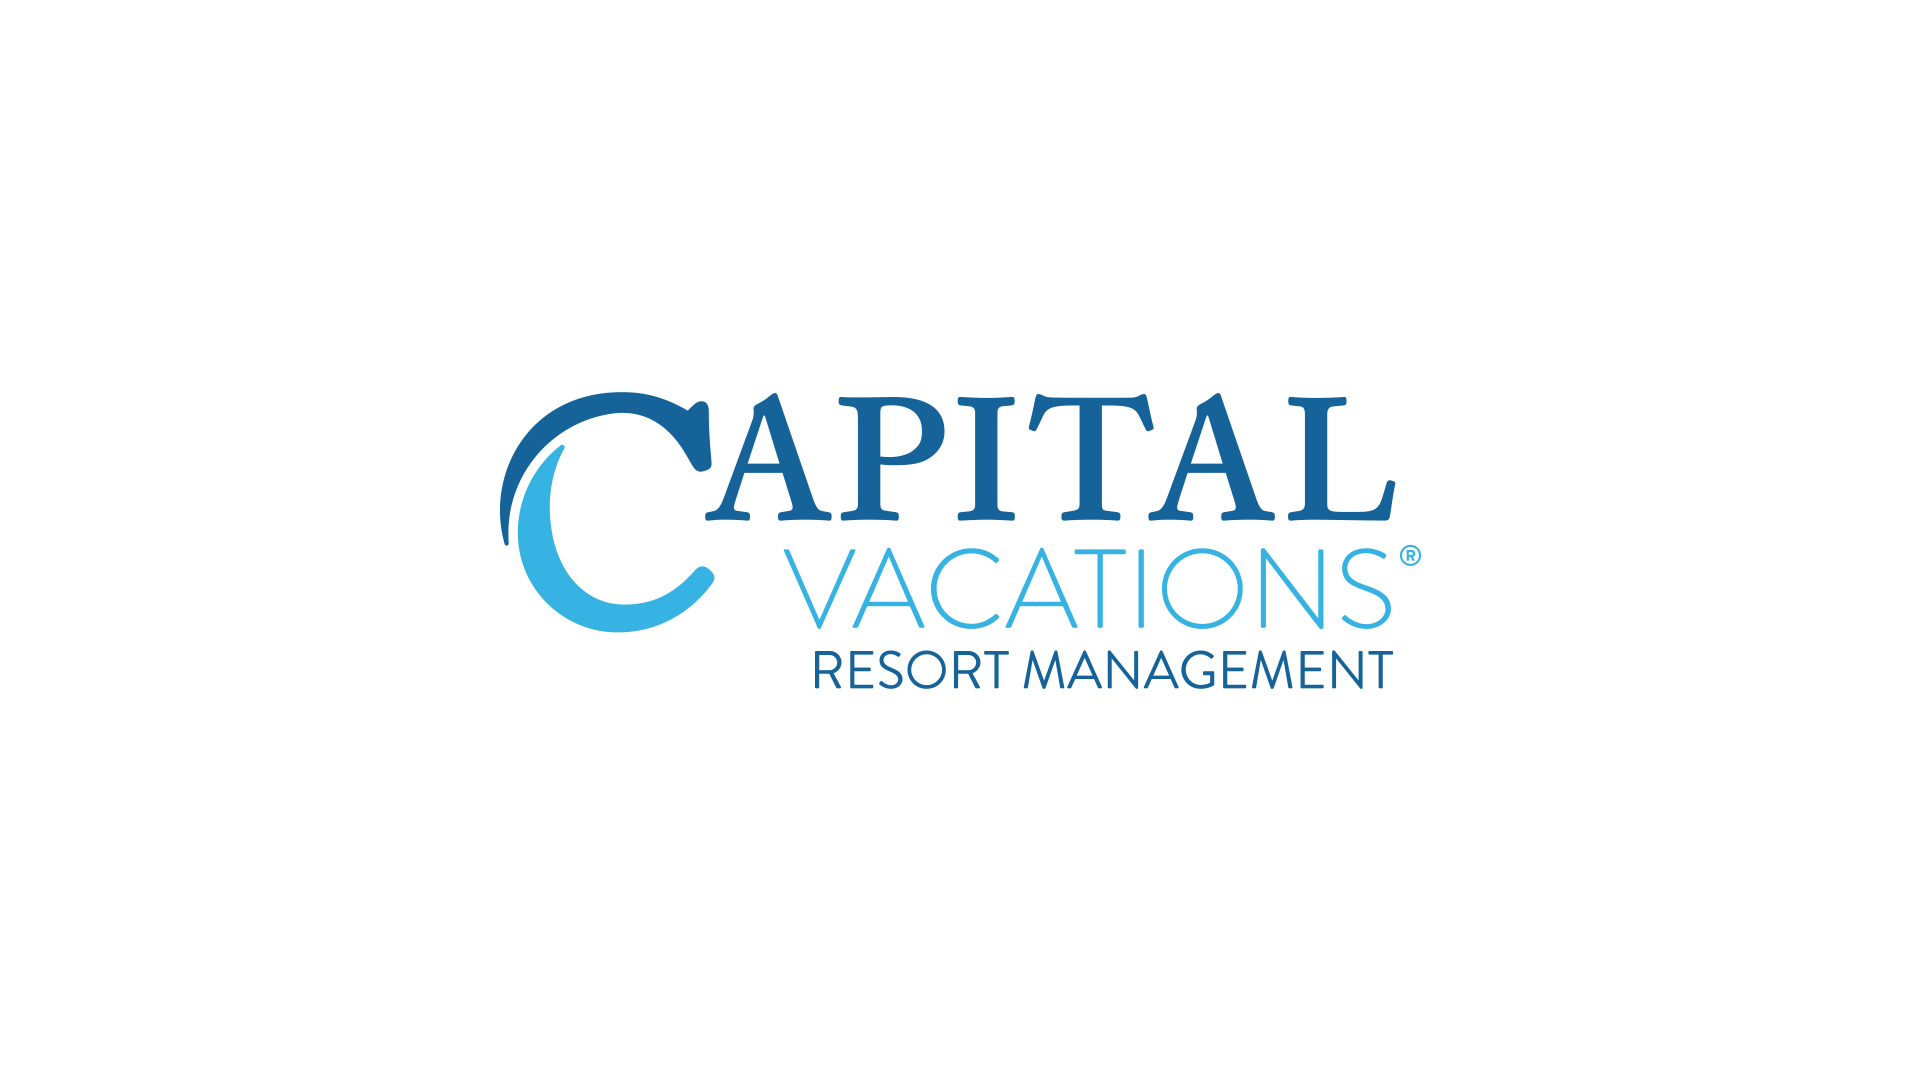 Capital Vacations announces the renewal of management contracts for 17 resorts Feature Image